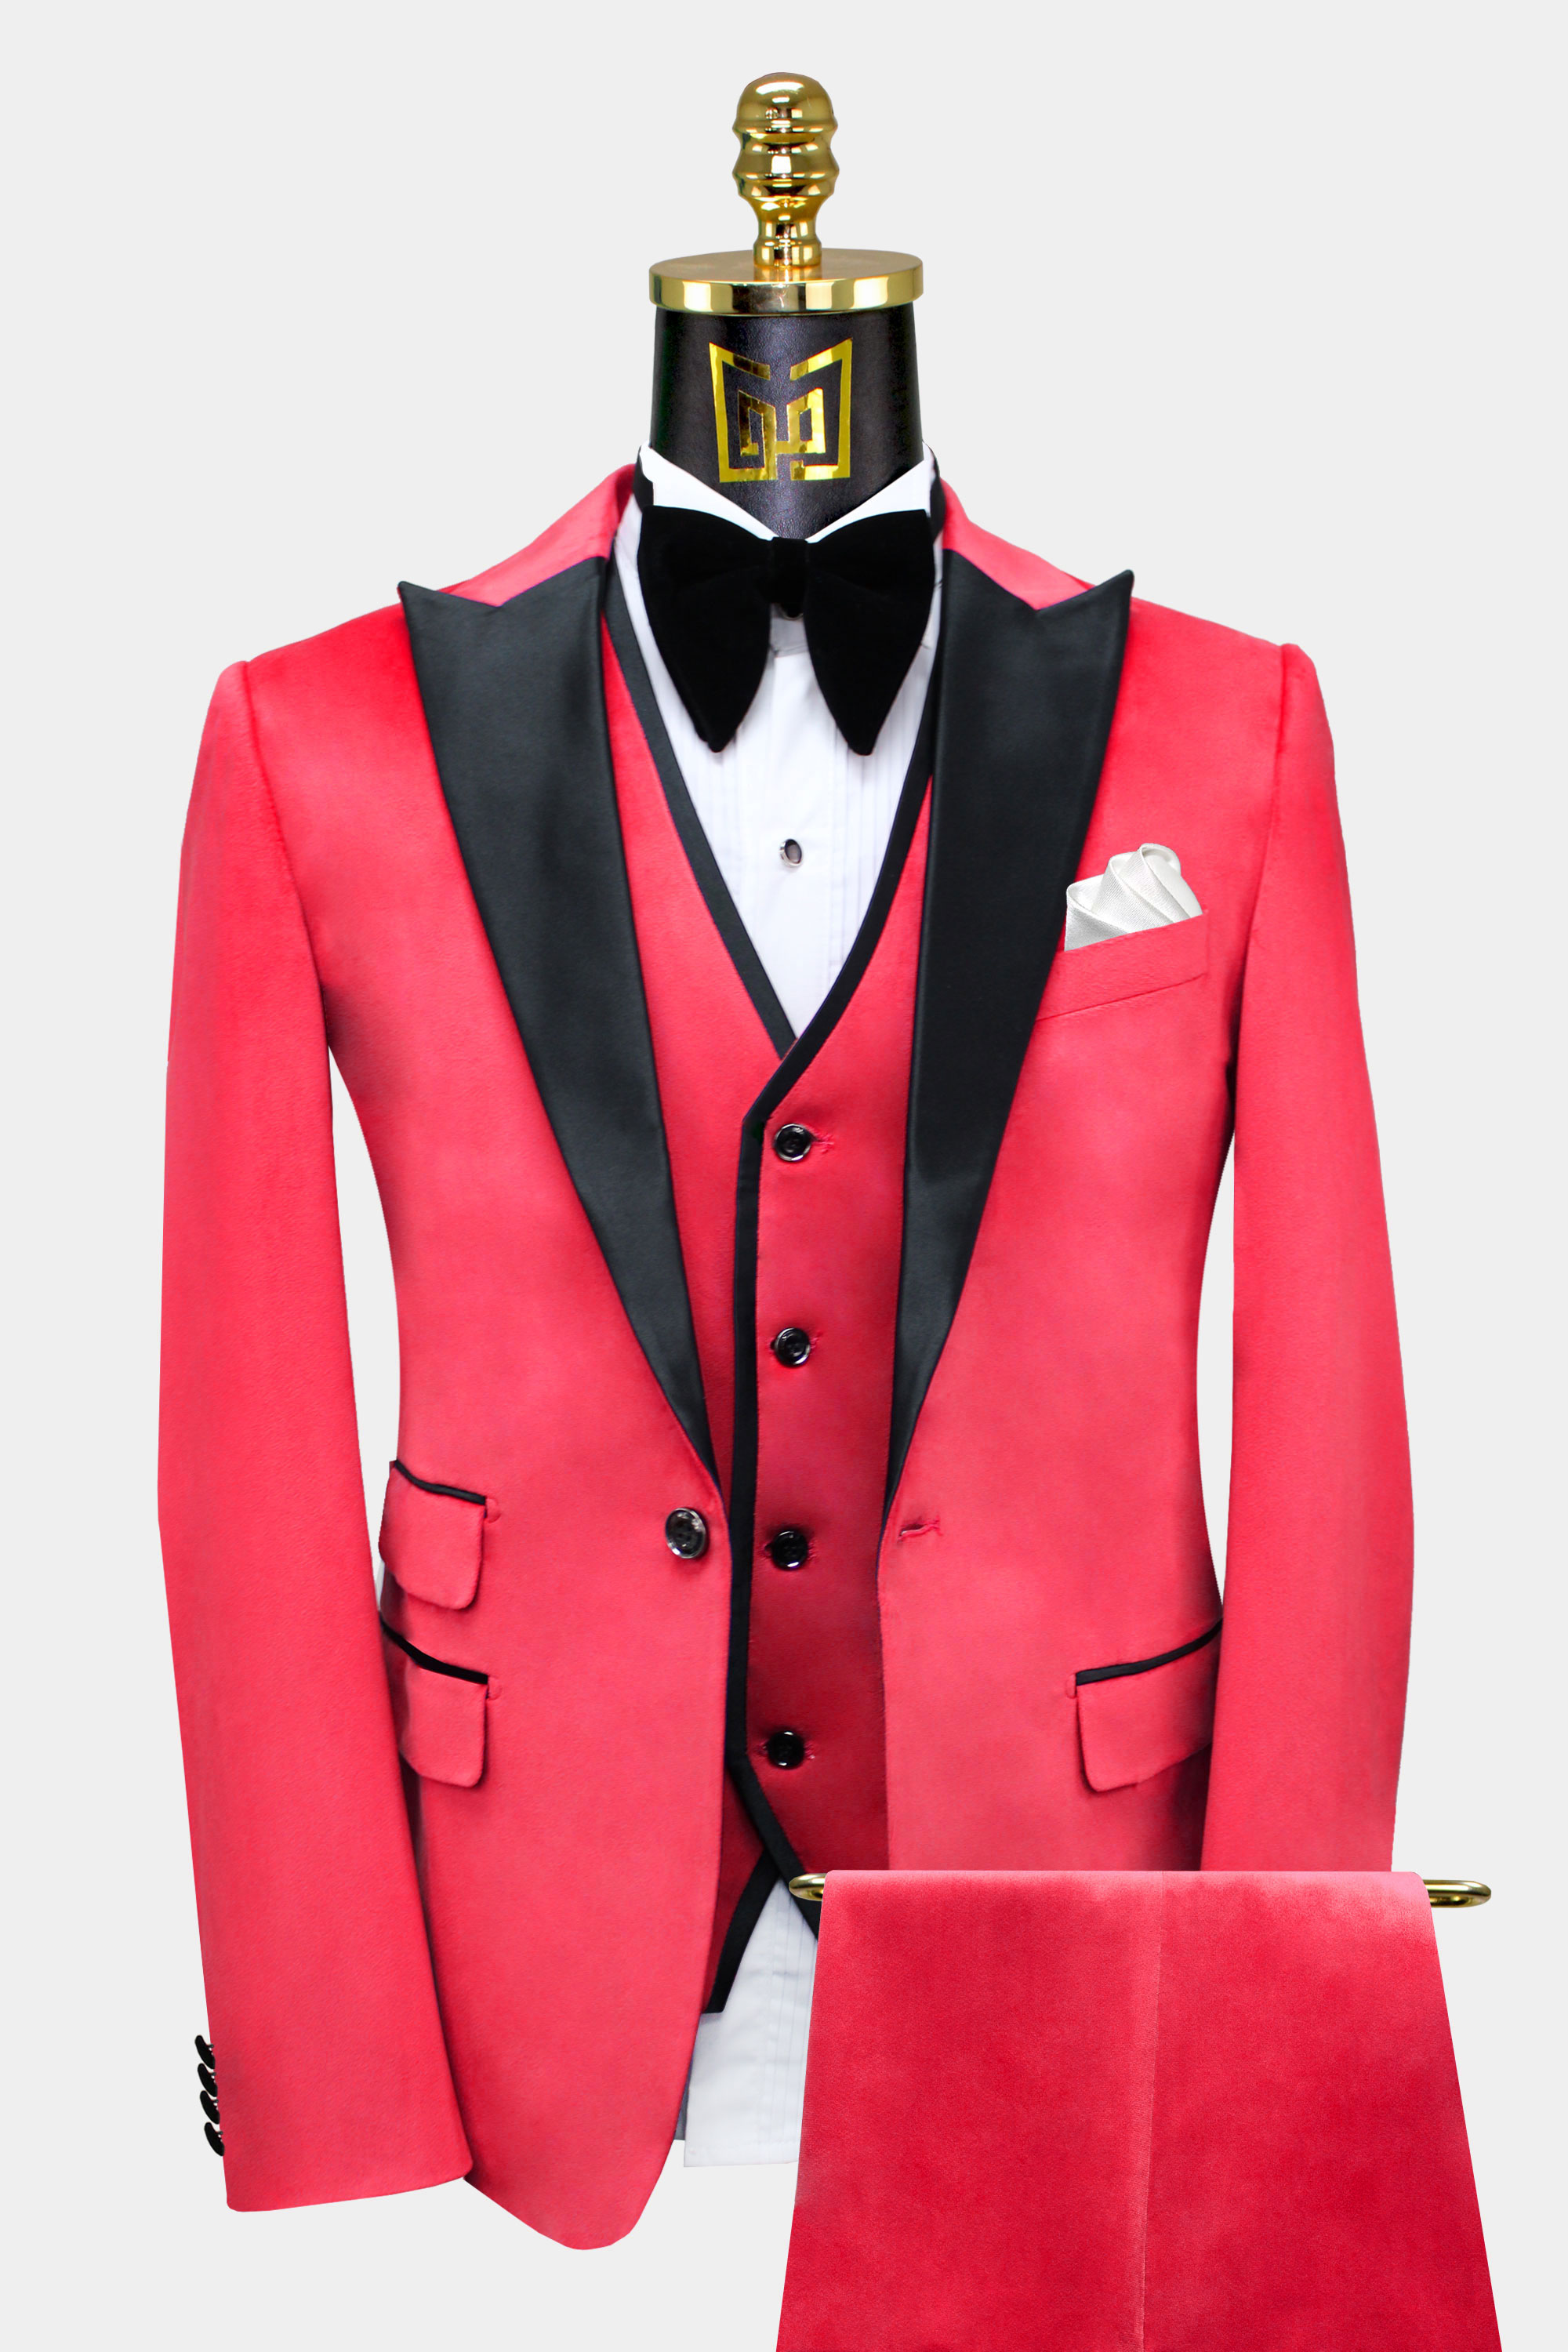 Men Wedding Suits 3 Piece Formal Fashion Red Slim Fit Groom Tuxedo Prom Suit